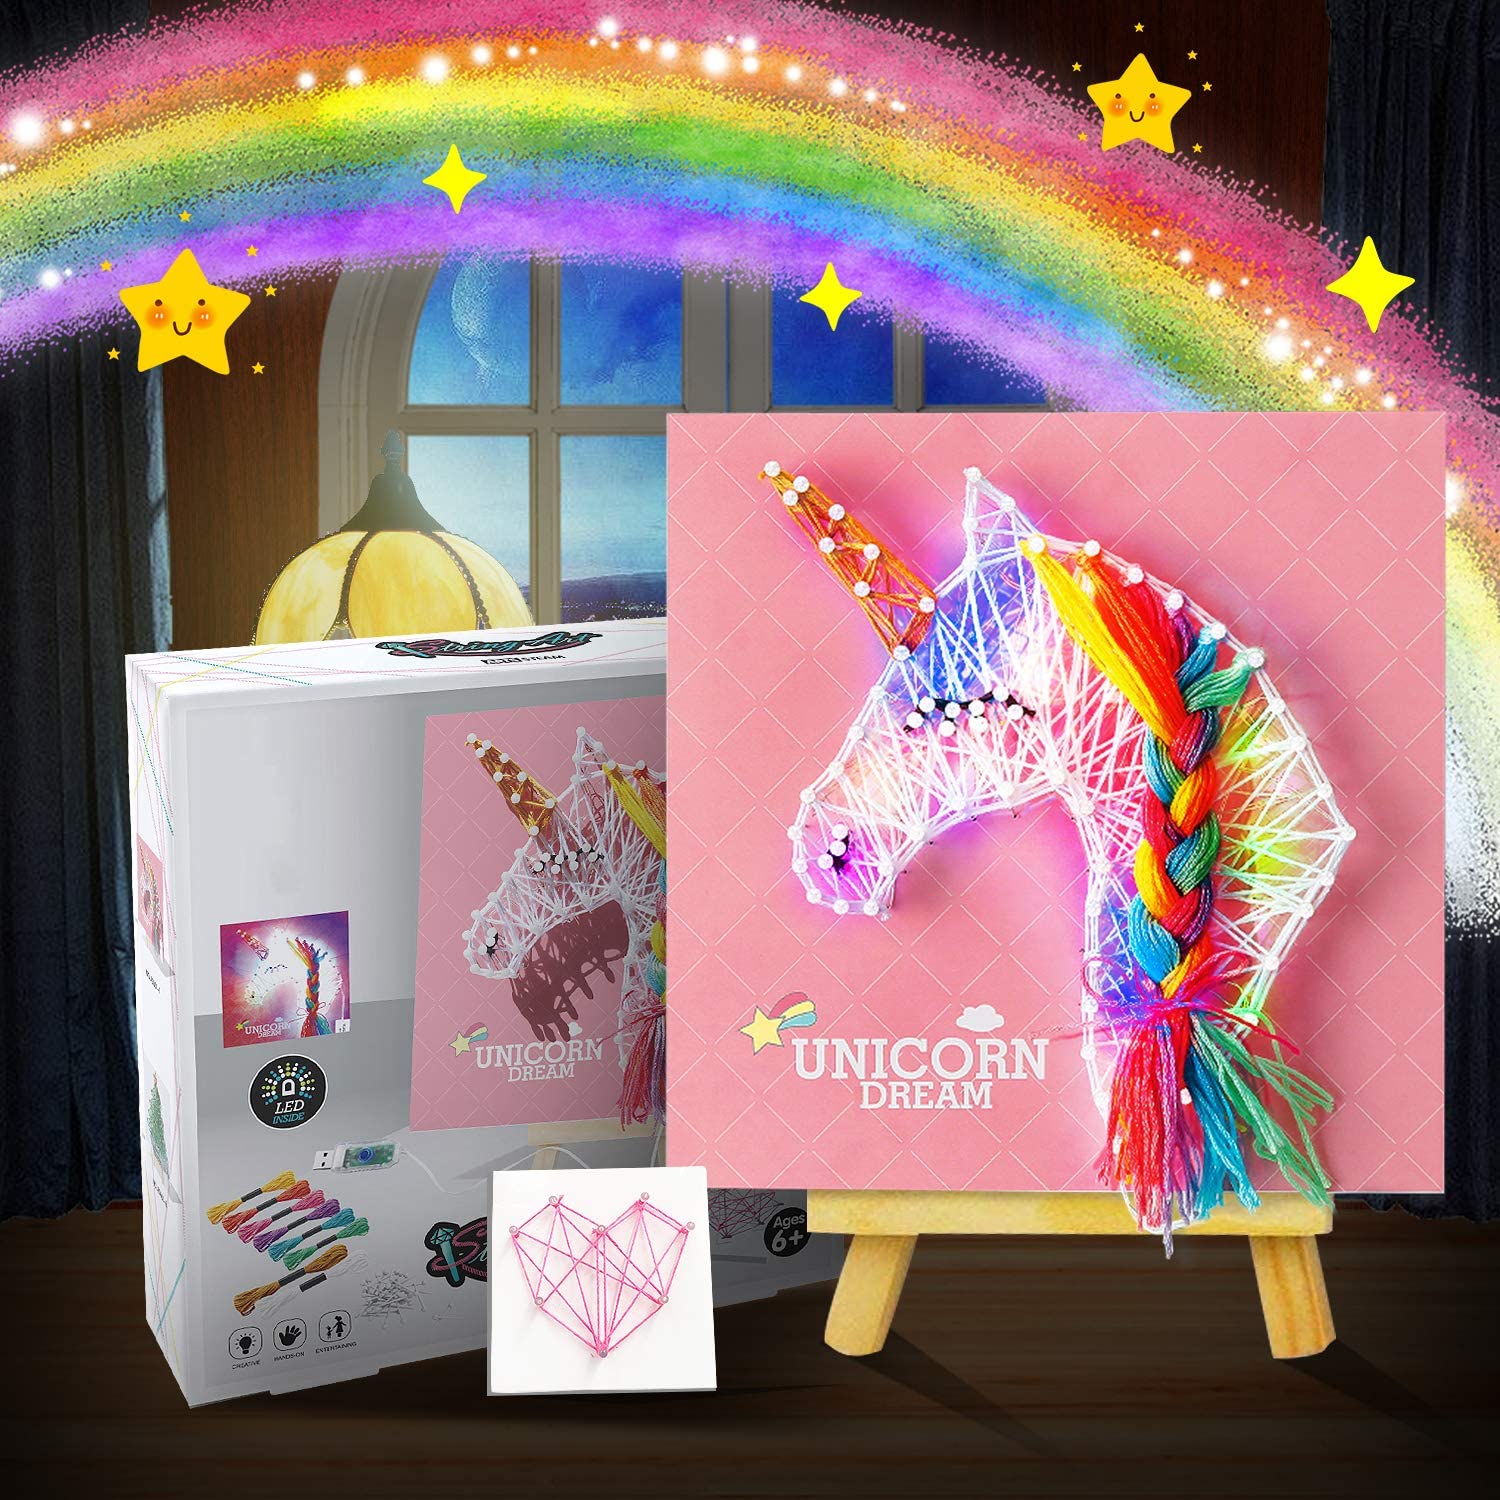 813GqaslBRL. AC SL1500 Best Gifts for 10 Year Old Girls Shopping for a preteen girl and just not sure what to get? Here are 20 of the BEST gifts for 10 year old girls and above. She's sure to adore one of these fabulous gifts!